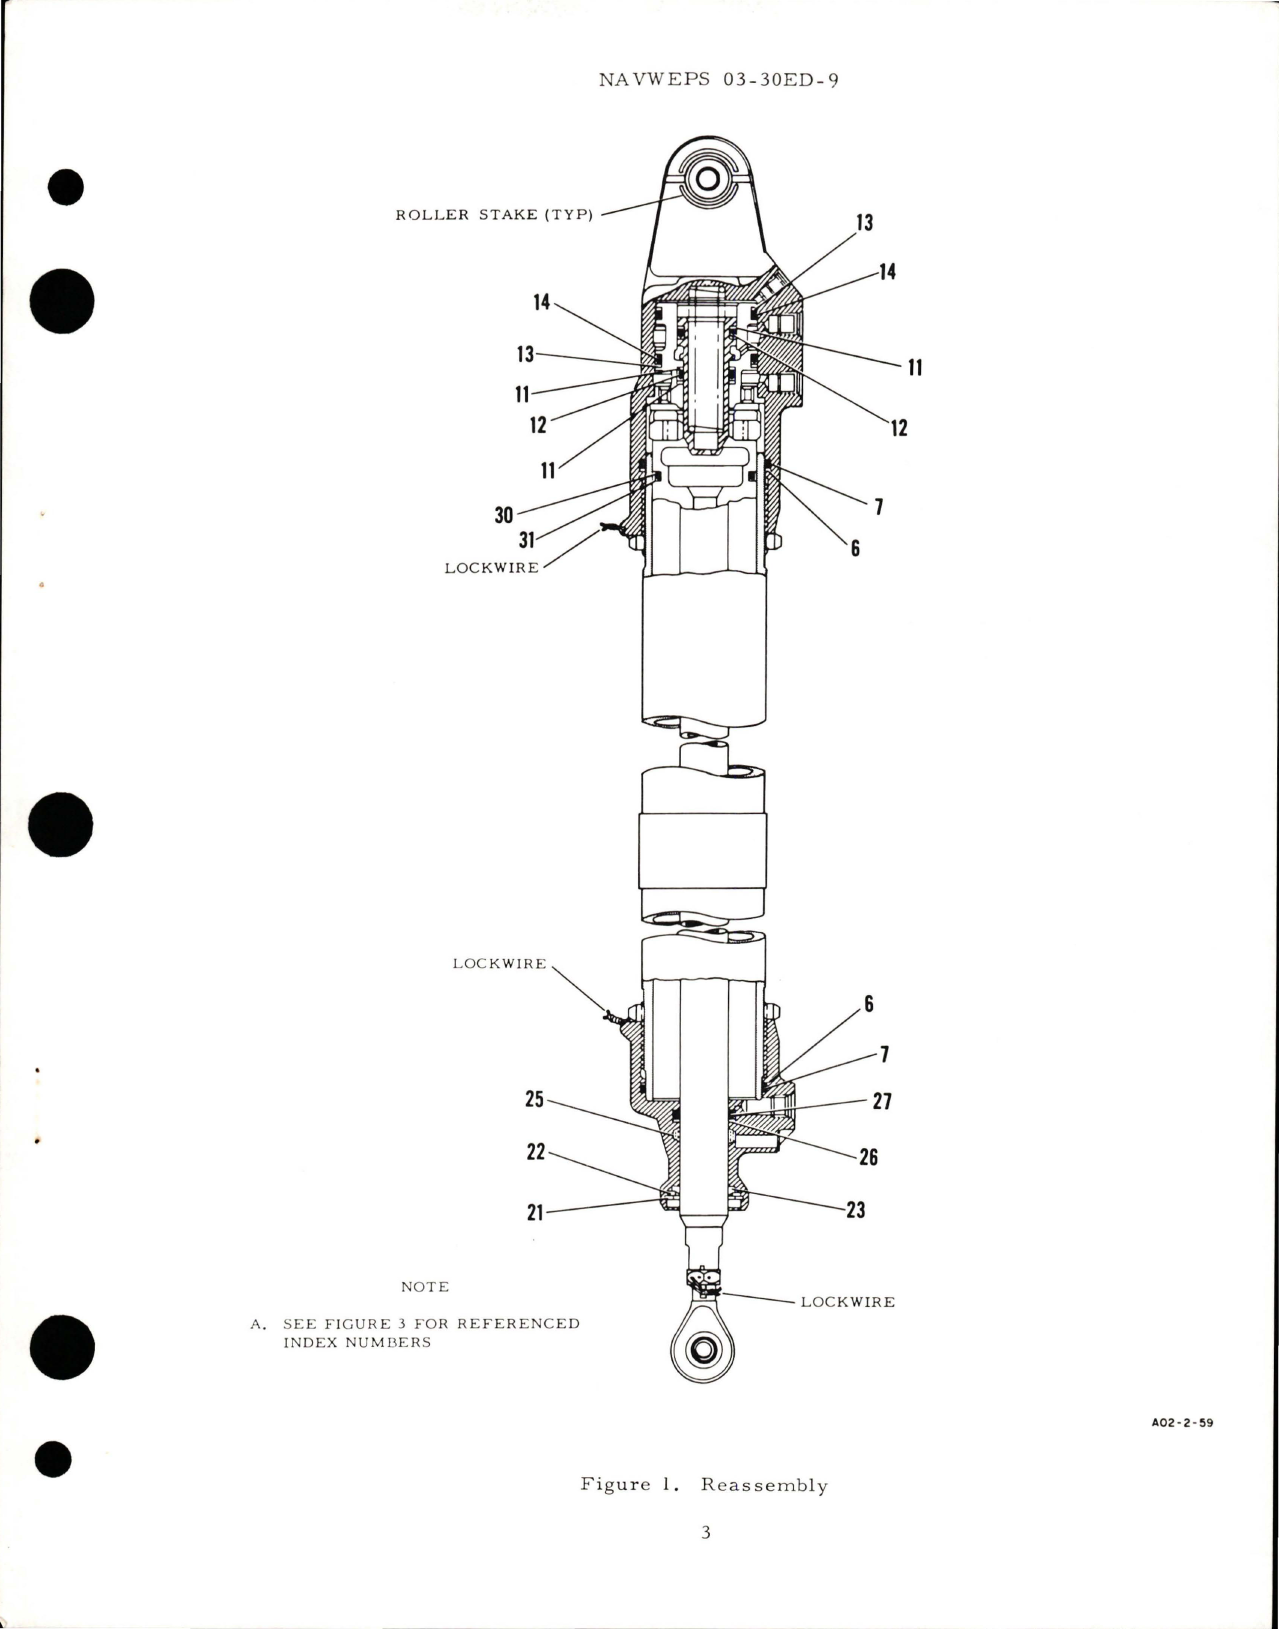 Sample page 5 from AirCorps Library document: Overhaul Instructions with Parts for Ramp Actuating Cylinder - Part A02H4700-1